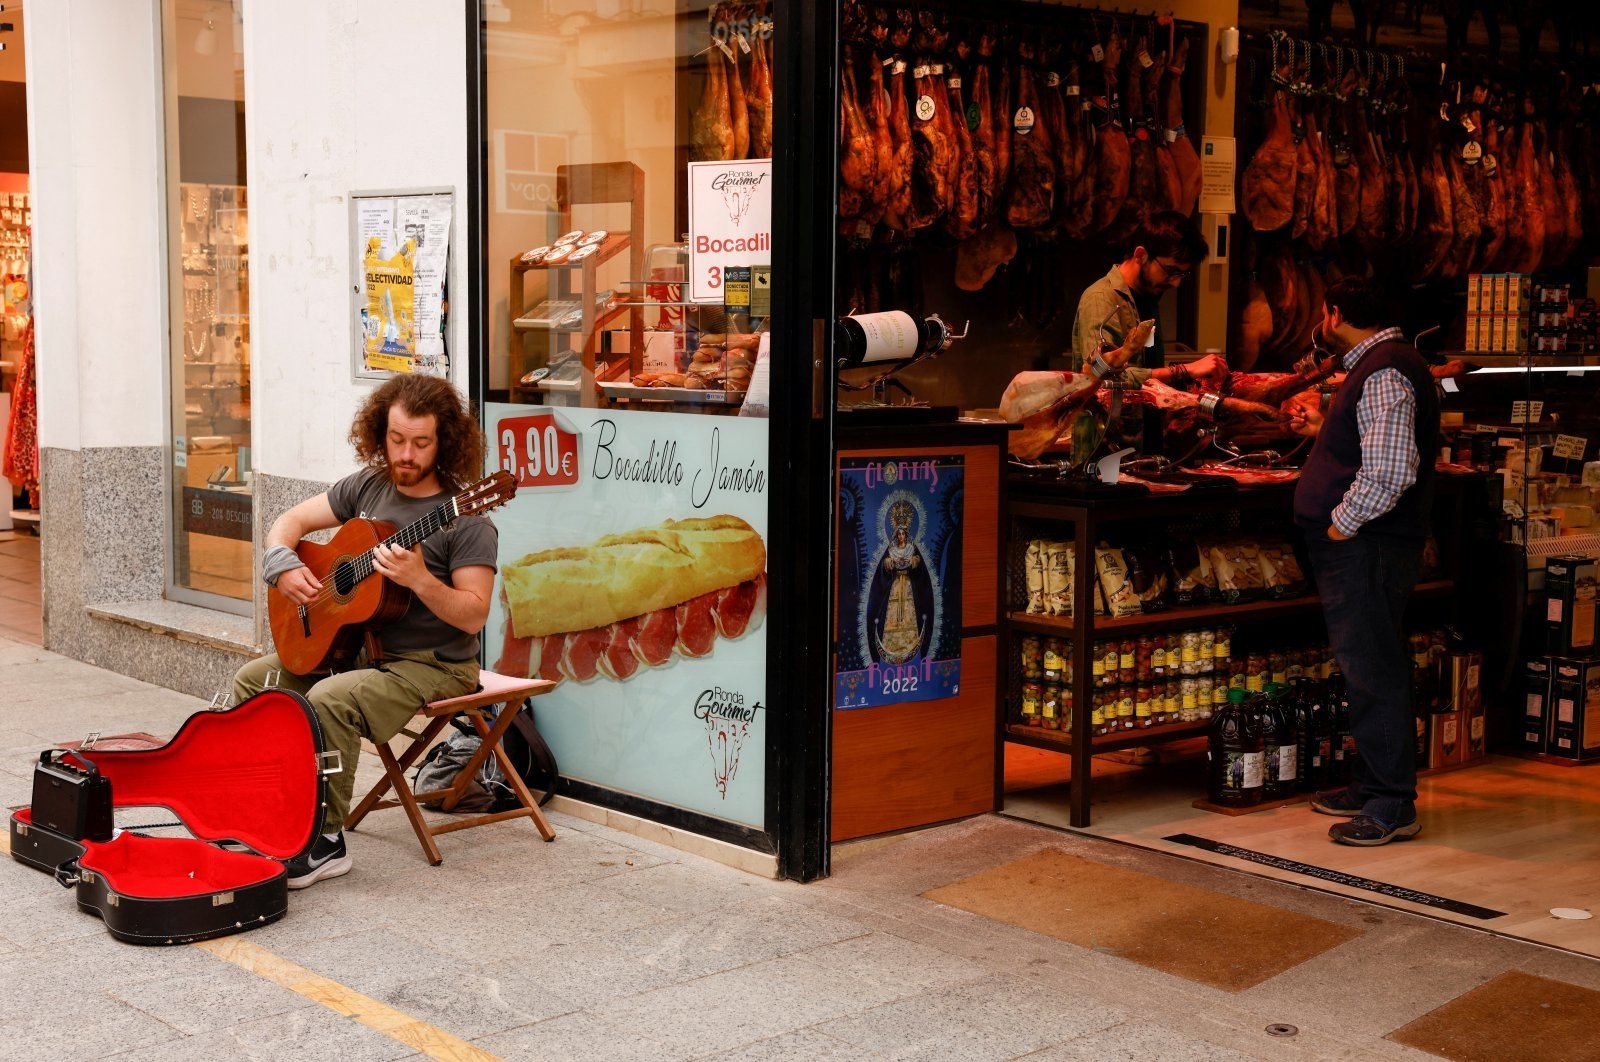 A street musician plays the guitar as a worker cuts ham in a shop in Ronda, southern Spain, April 27, 2022. (Reuters File Photo)